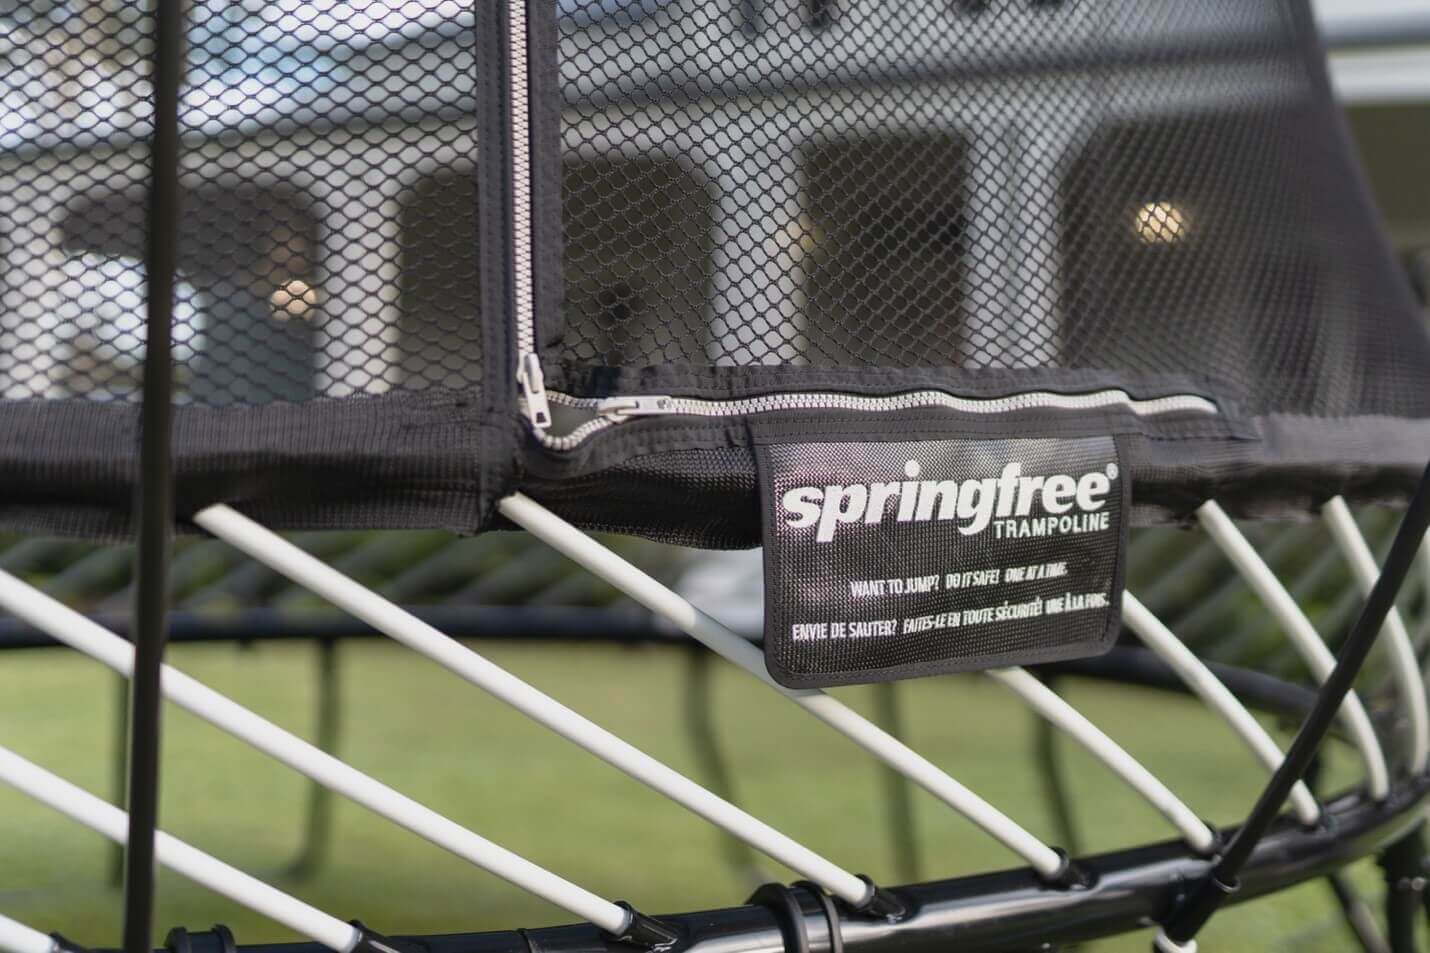 A close-up view of the Springfree Trampoline rods